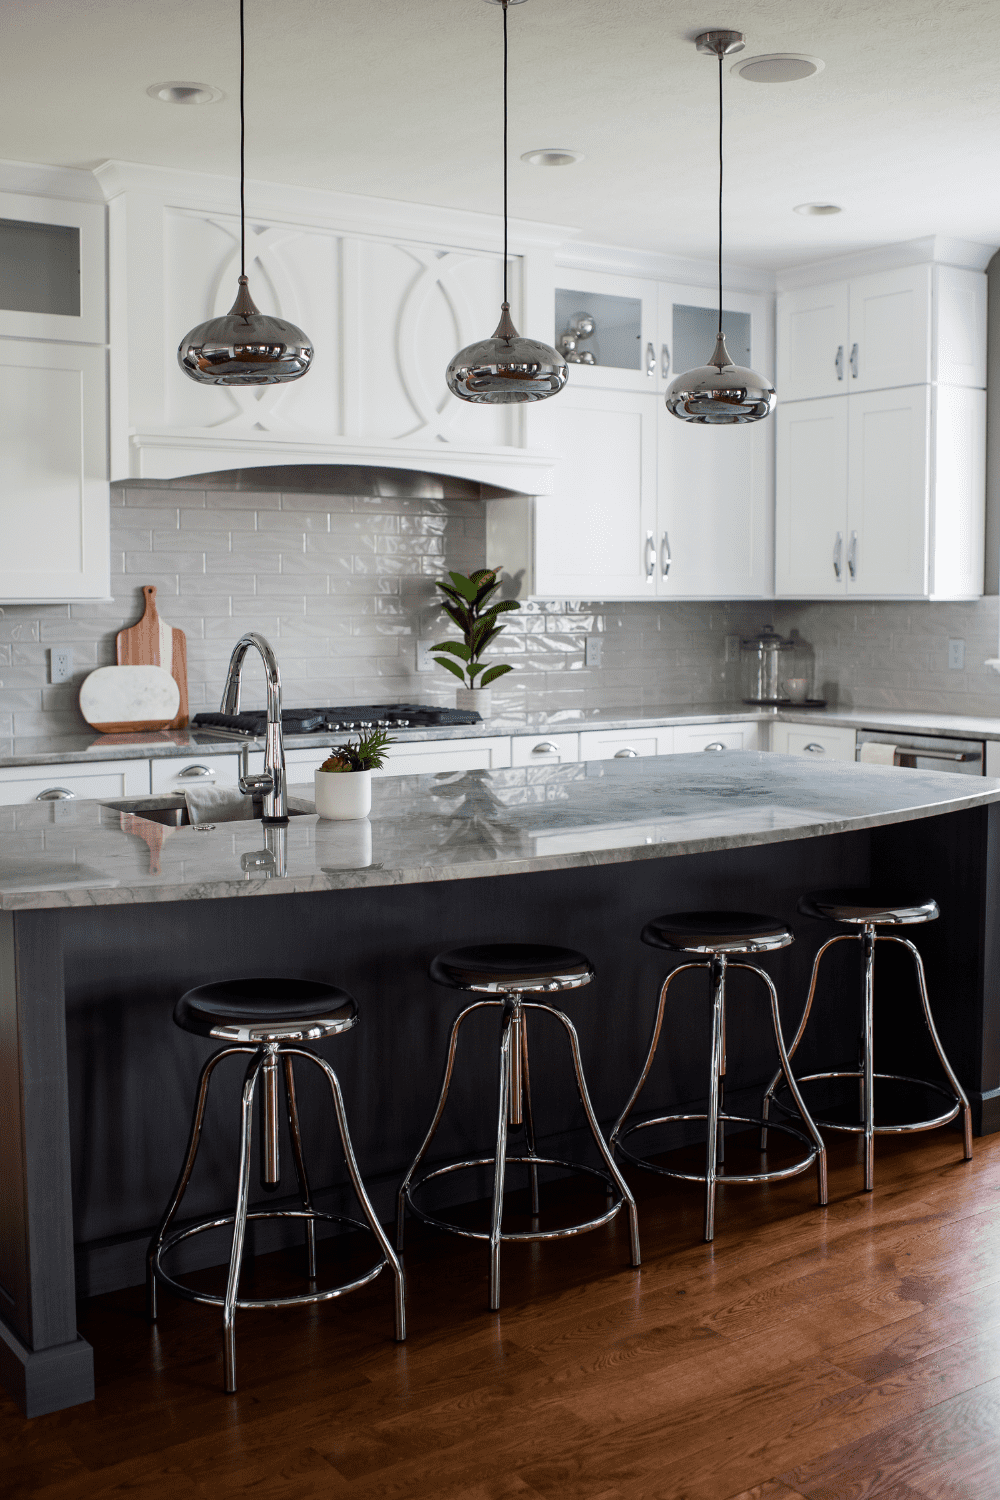 Nicholas Design Build | A kitchen with a center island and stools.